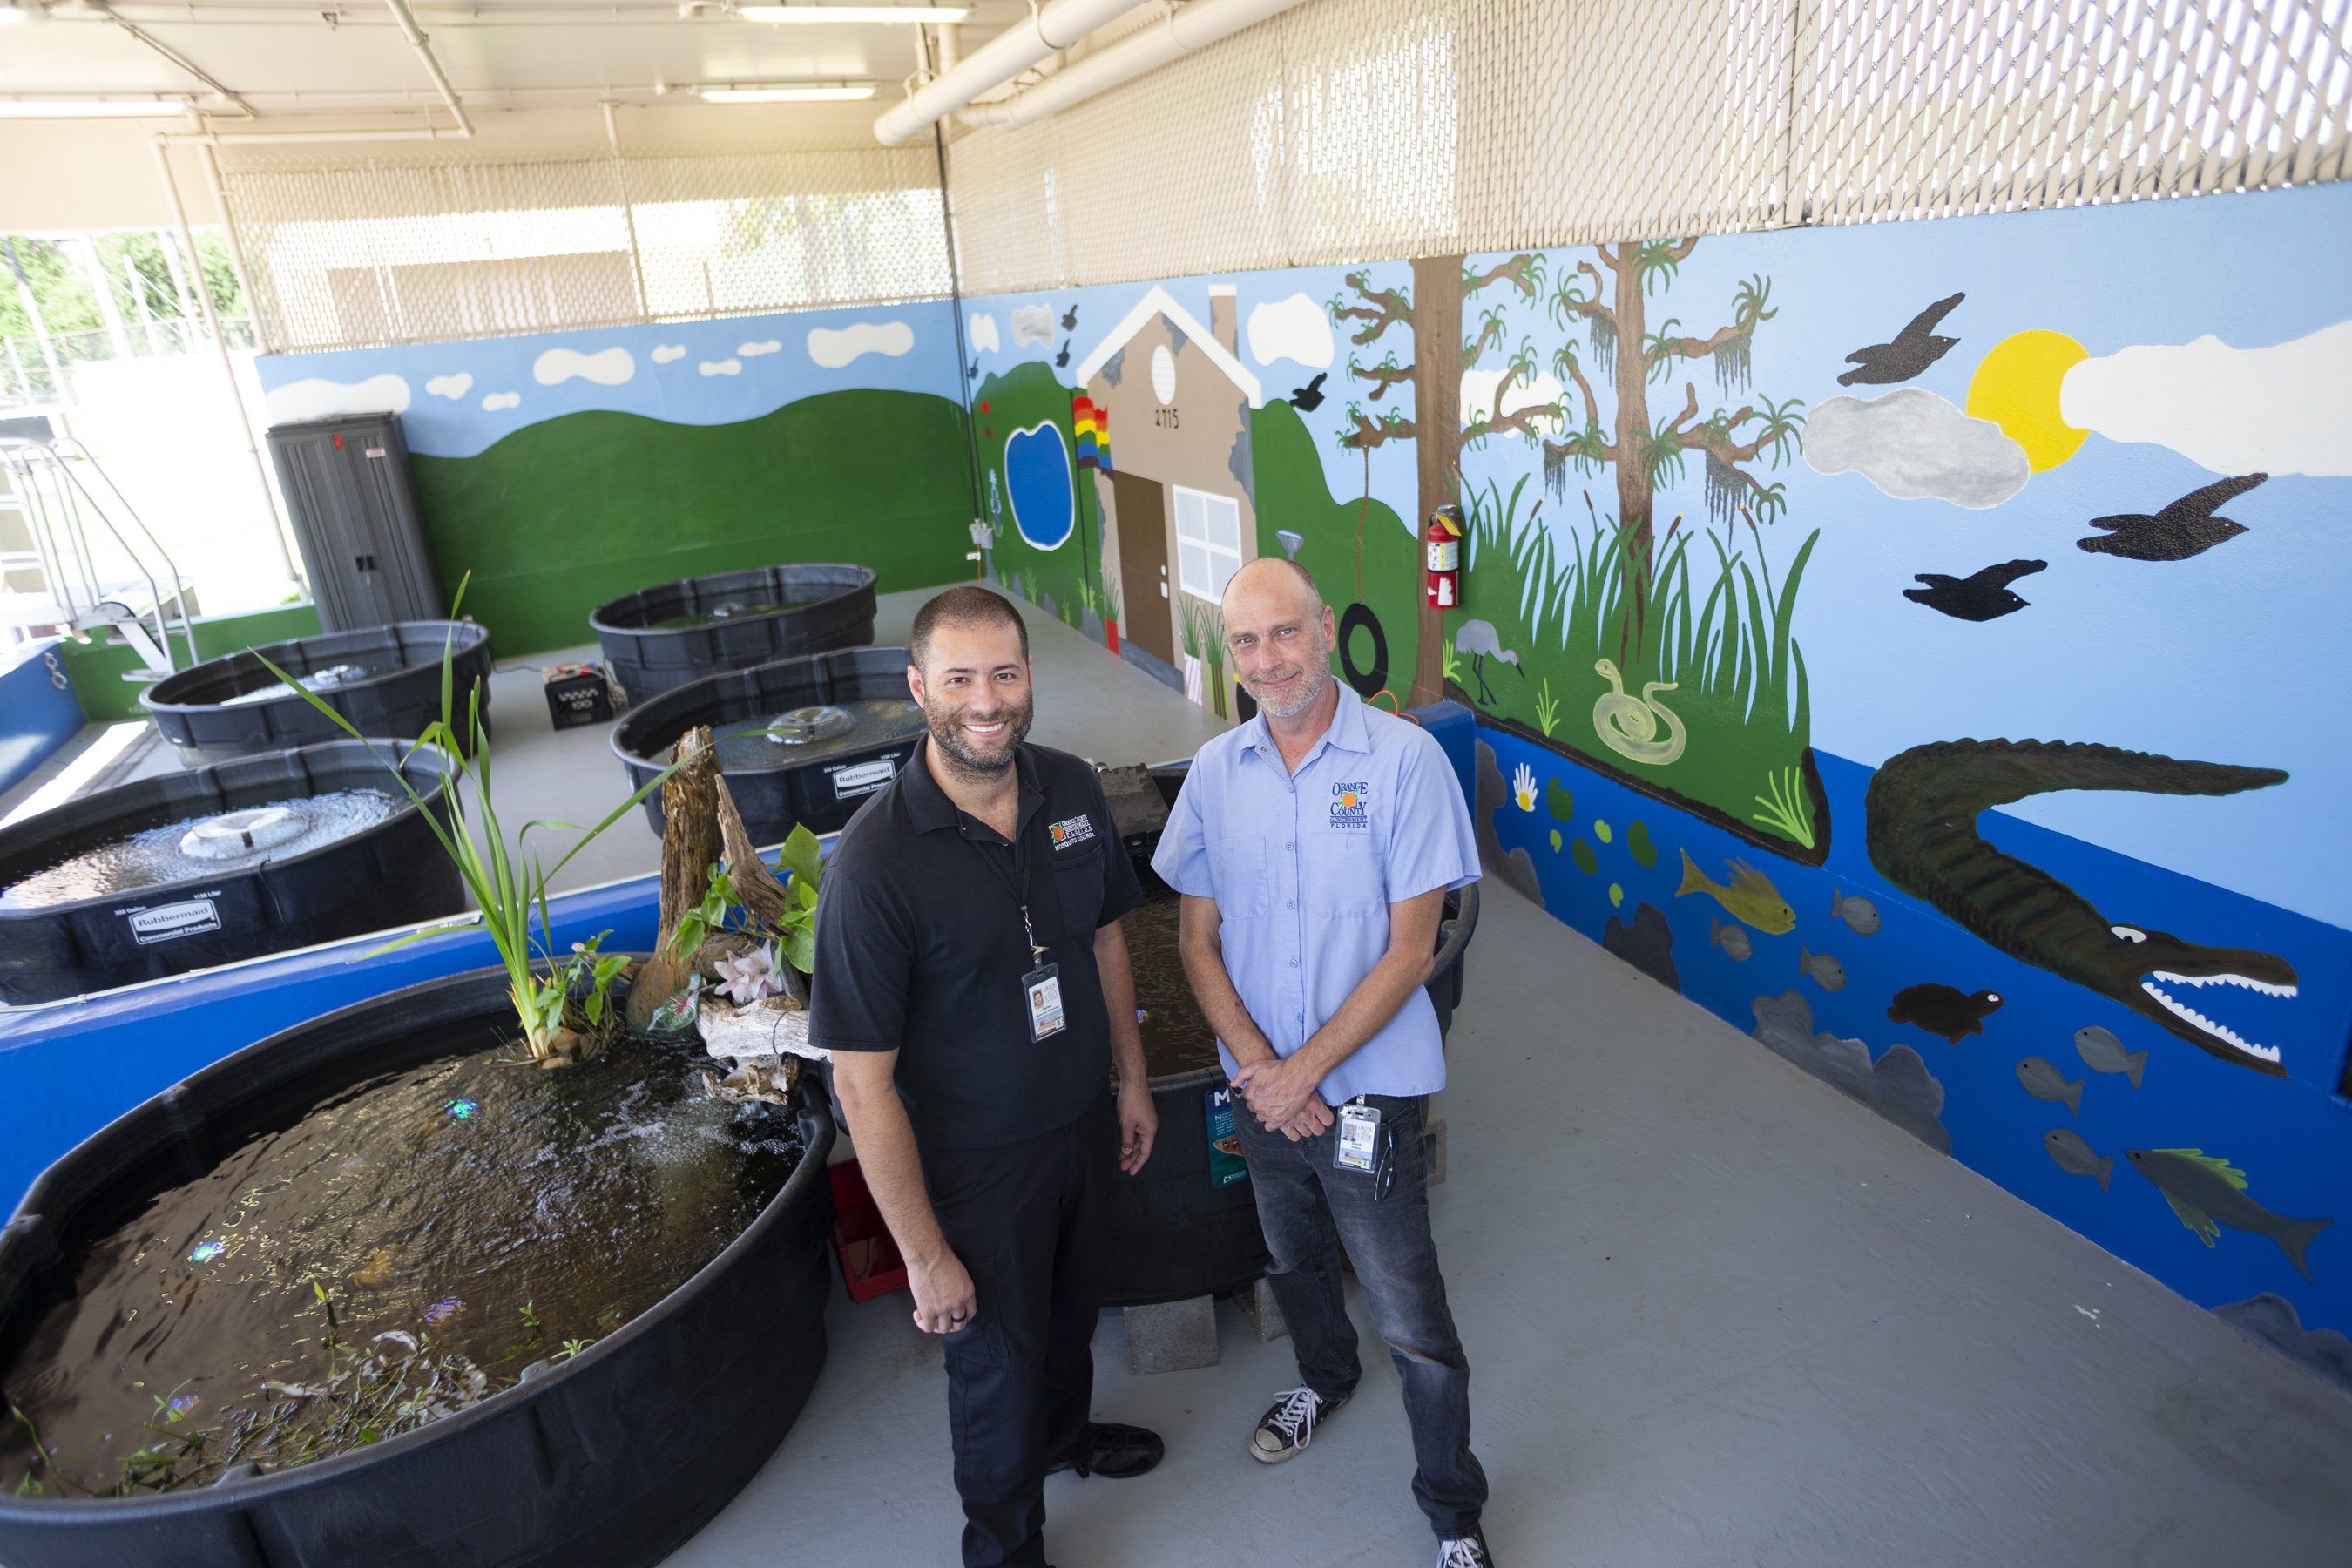 Two men inside a building, standing by six car-size containers full of water and fish. Behind them is a newly painted mural depicting a lake and wildlife.